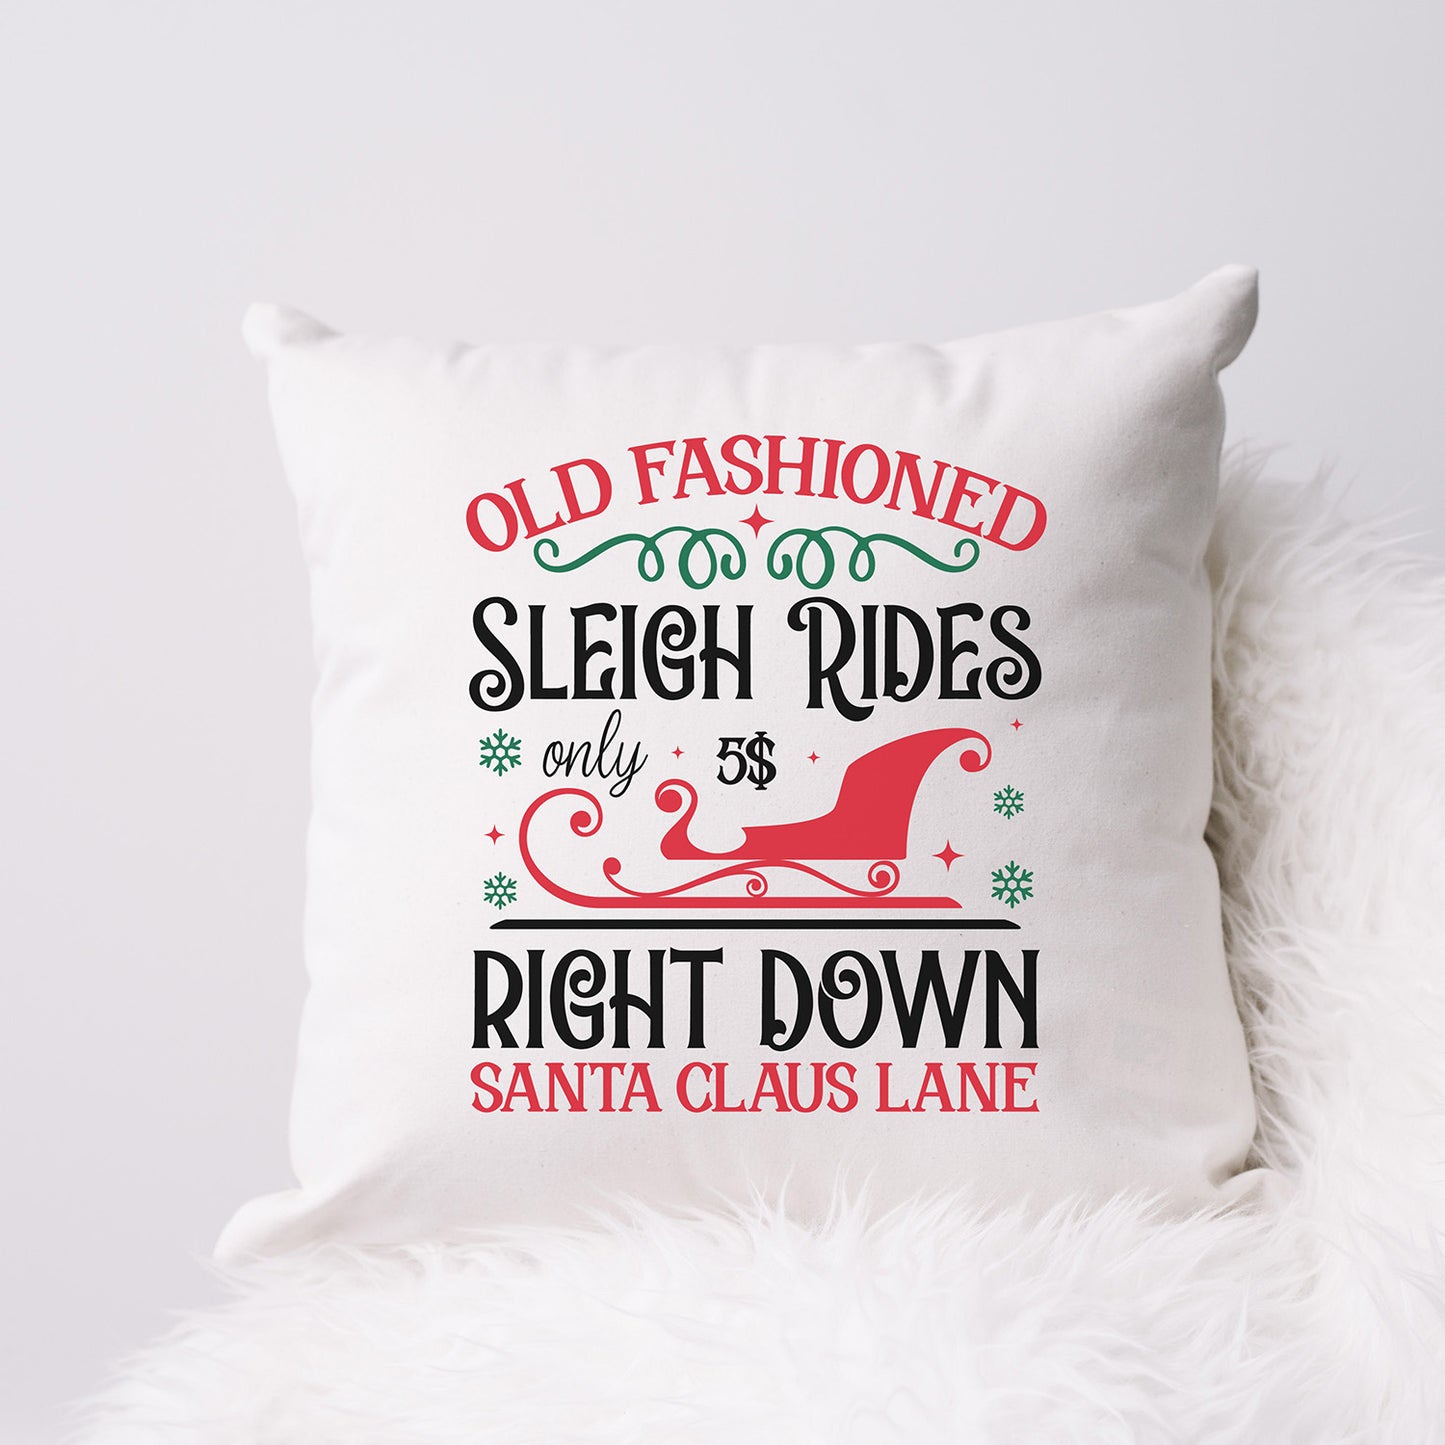 "Old Fashioned Sleigh Rides Right Down Santa Claus Lane" Graphic